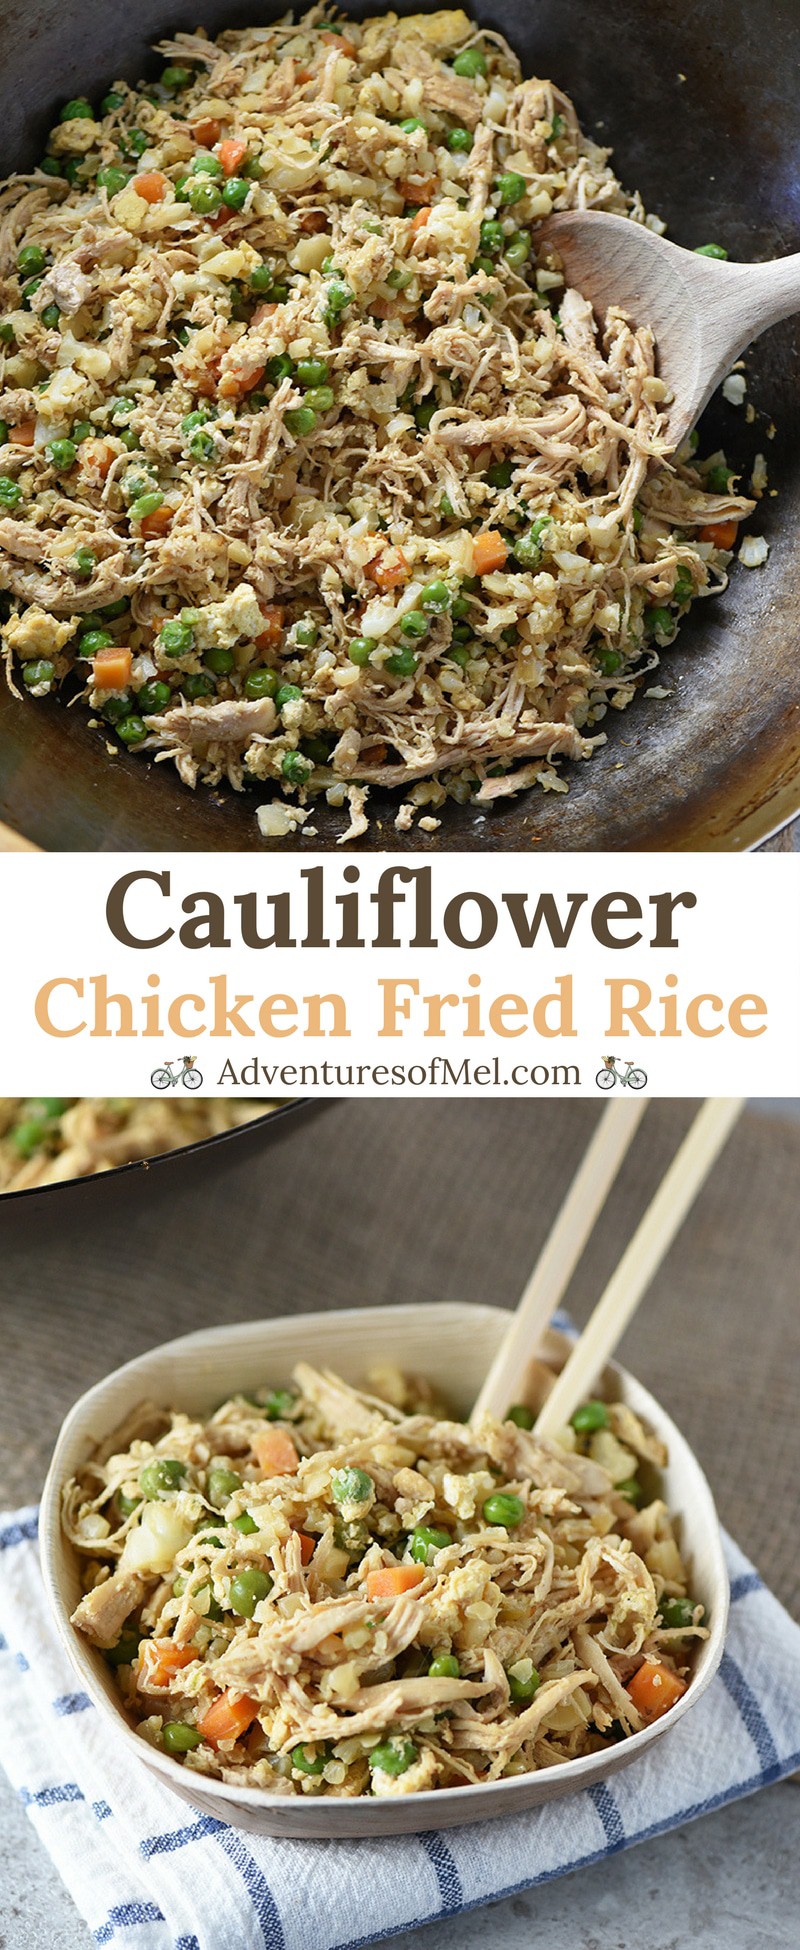 Cauliflower Chicken Fried Rice is a healthier version of your favorite takeout food. Made with riced cauliflower, chicken, eggs, and veggies, it's a delicious dinner idea the whole family will love!